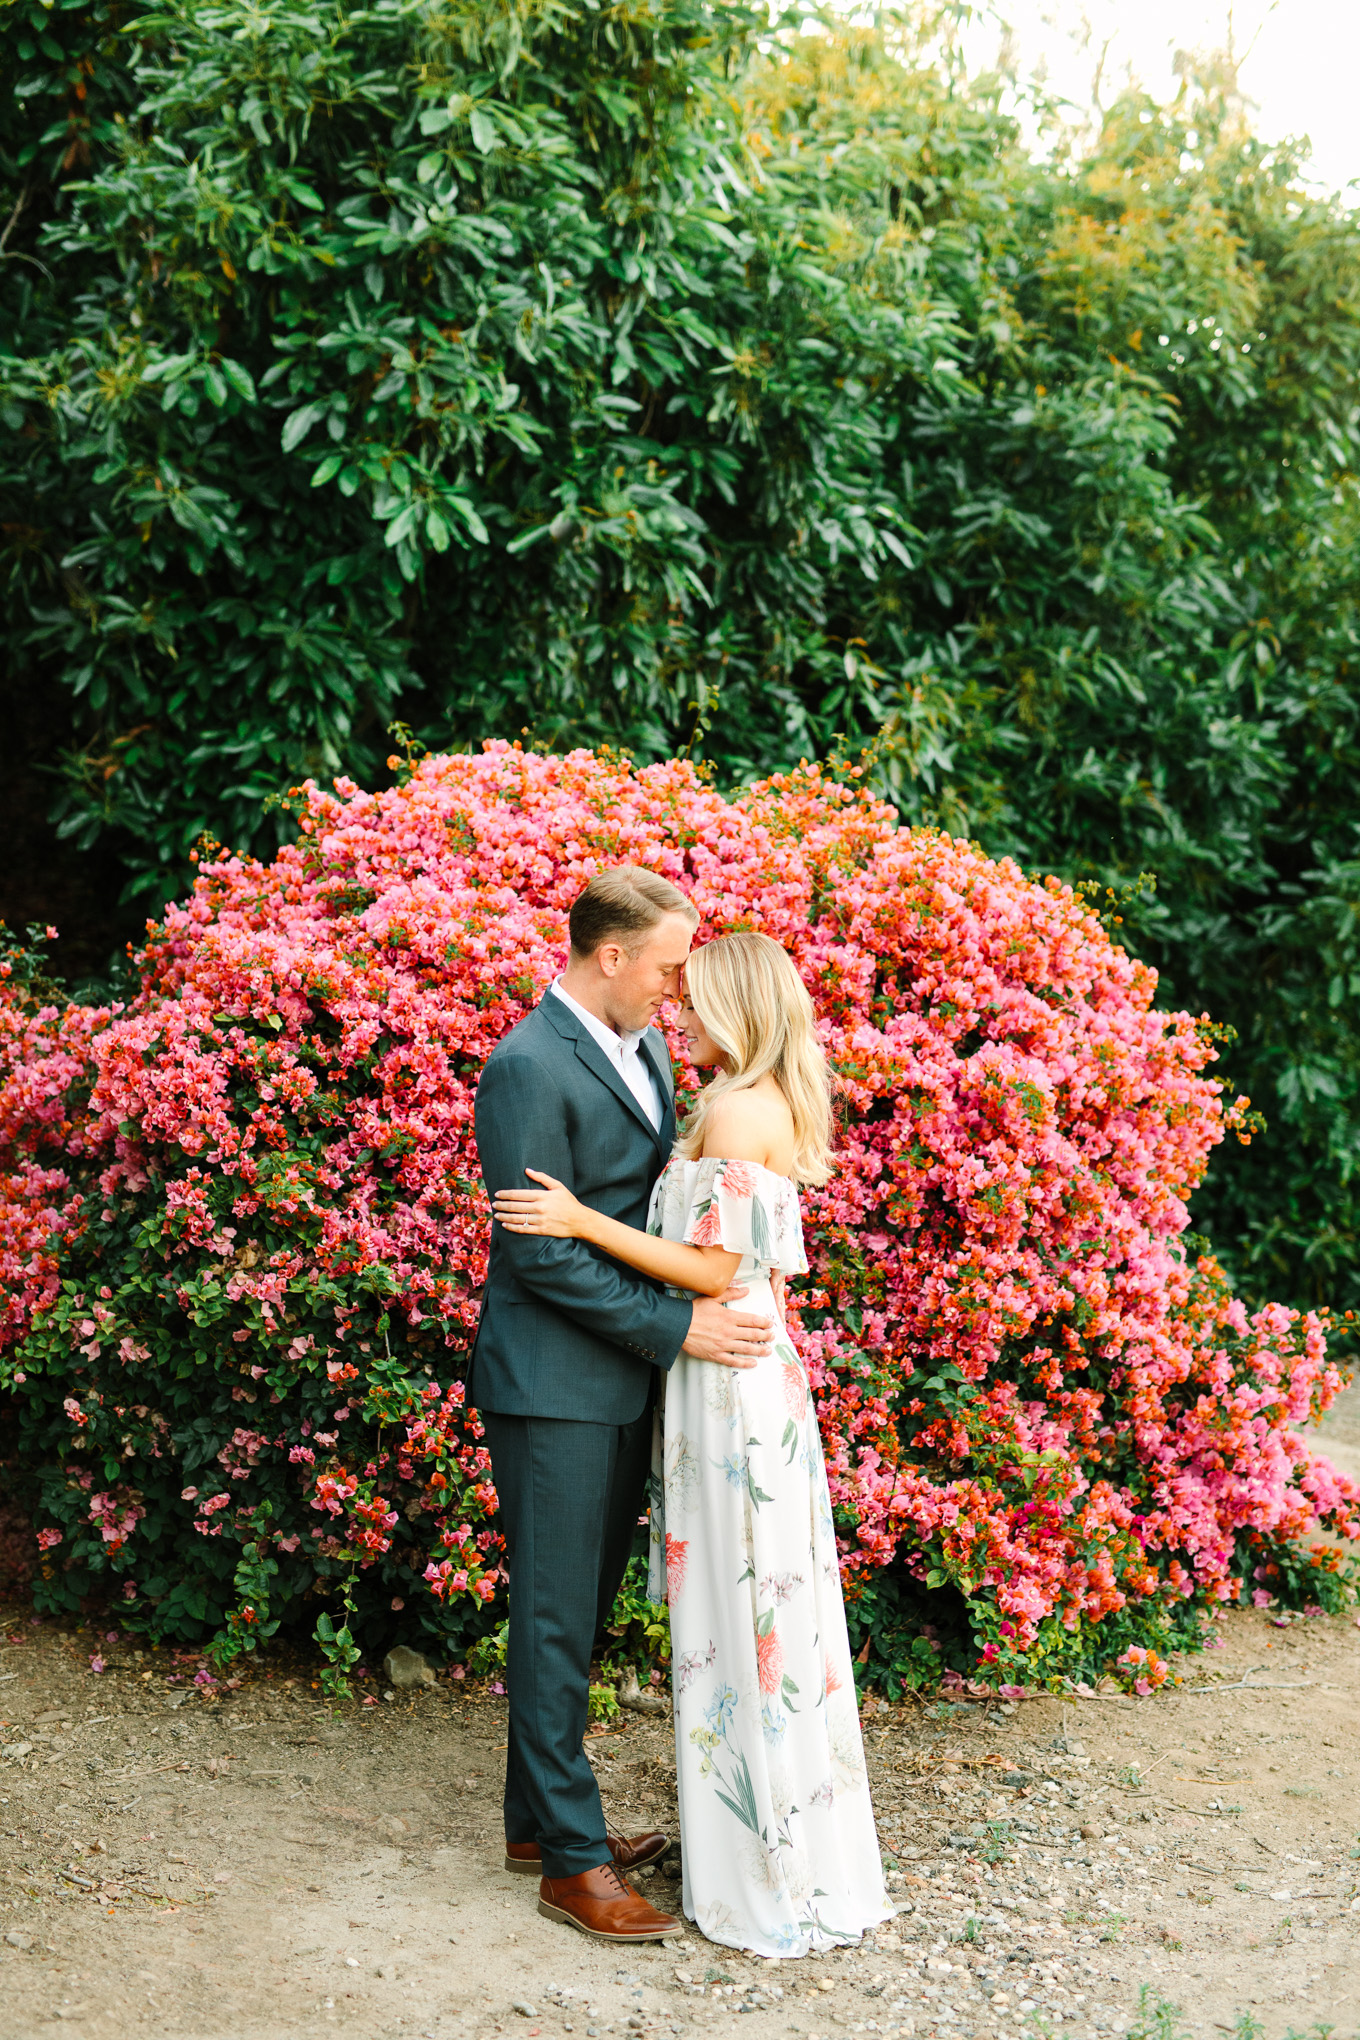 Bride and groom with blooming bougainvillea at Quail Ranch | Best Southern California Garden Wedding Venues | Colorful and elevated wedding photography for fun-loving couples | #gardenvenue #weddingvenue #socalweddingvenue #bouquetideas #uniquebouquet   Source: Mary Costa Photography | Los Angeles 